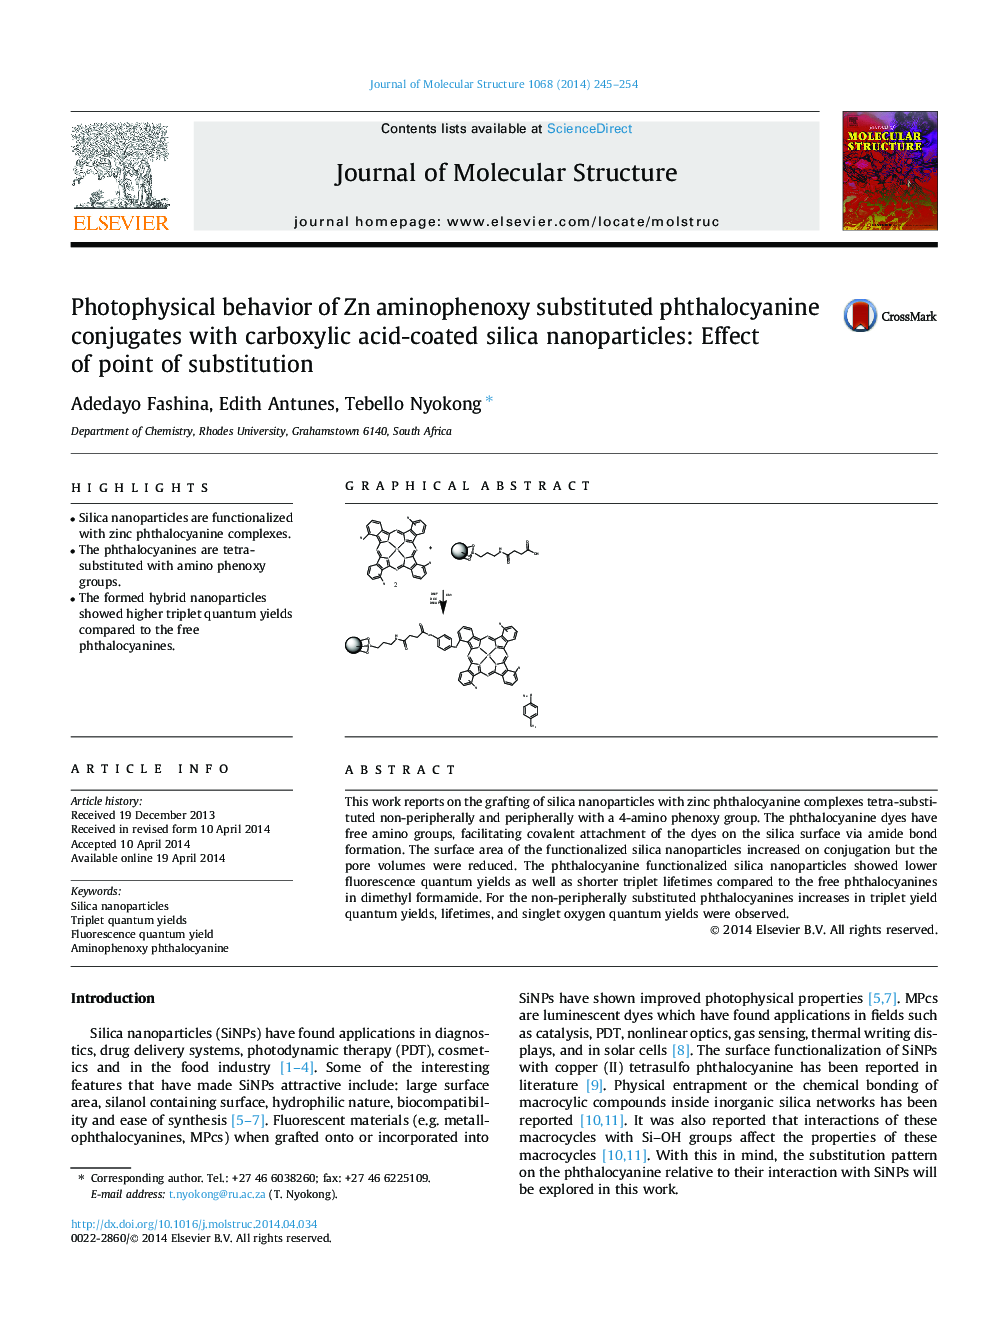 Photophysical behavior of Zn aminophenoxy substituted phthalocyanine conjugates with carboxylic acid-coated silica nanoparticles: Effect of point of substitution